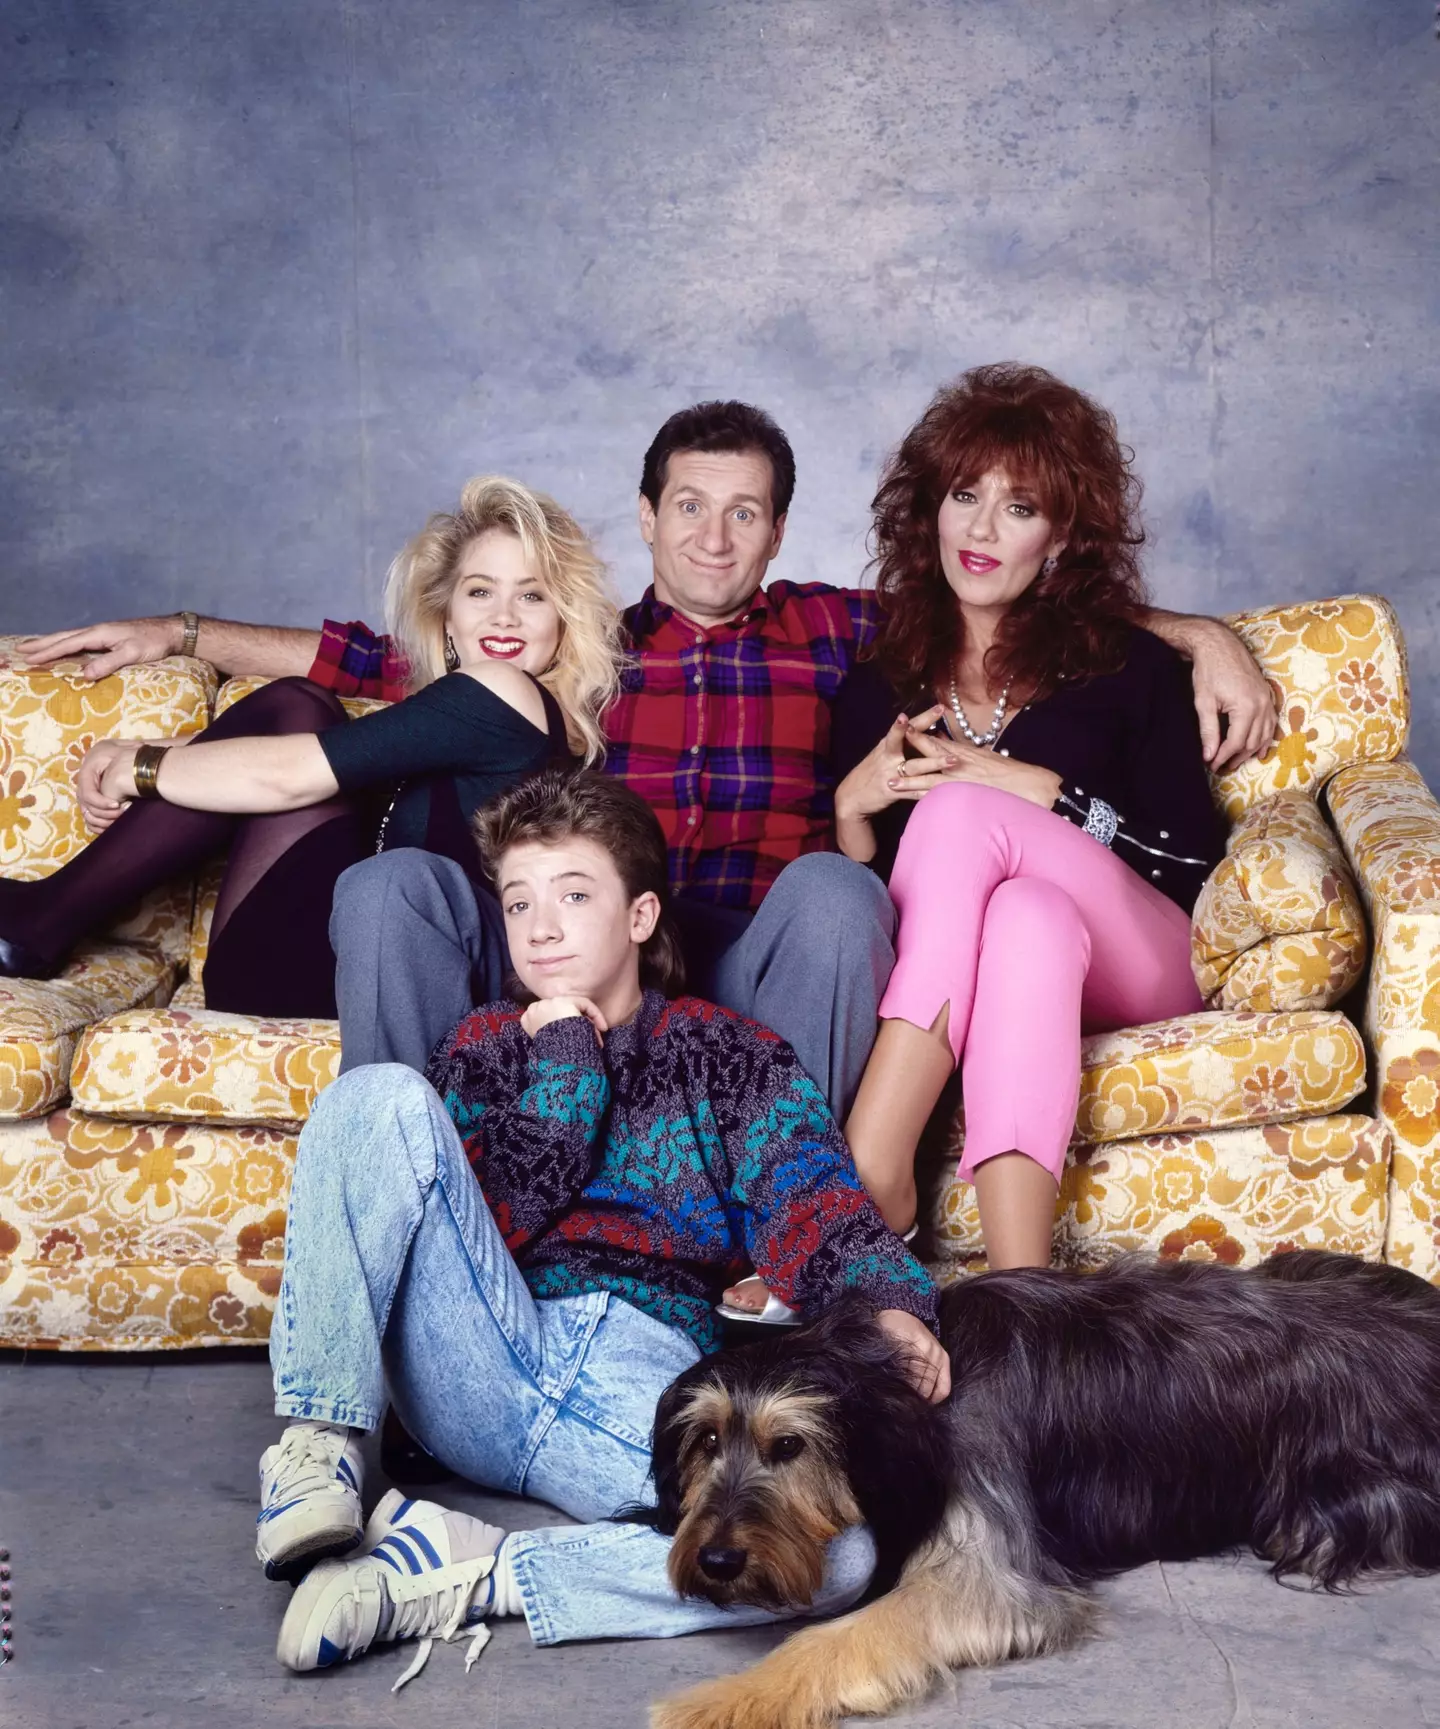 Christina Applegate found fame on Married... with Children in the 1980s (Aaron Rapoport/Corbis/Getty Images)